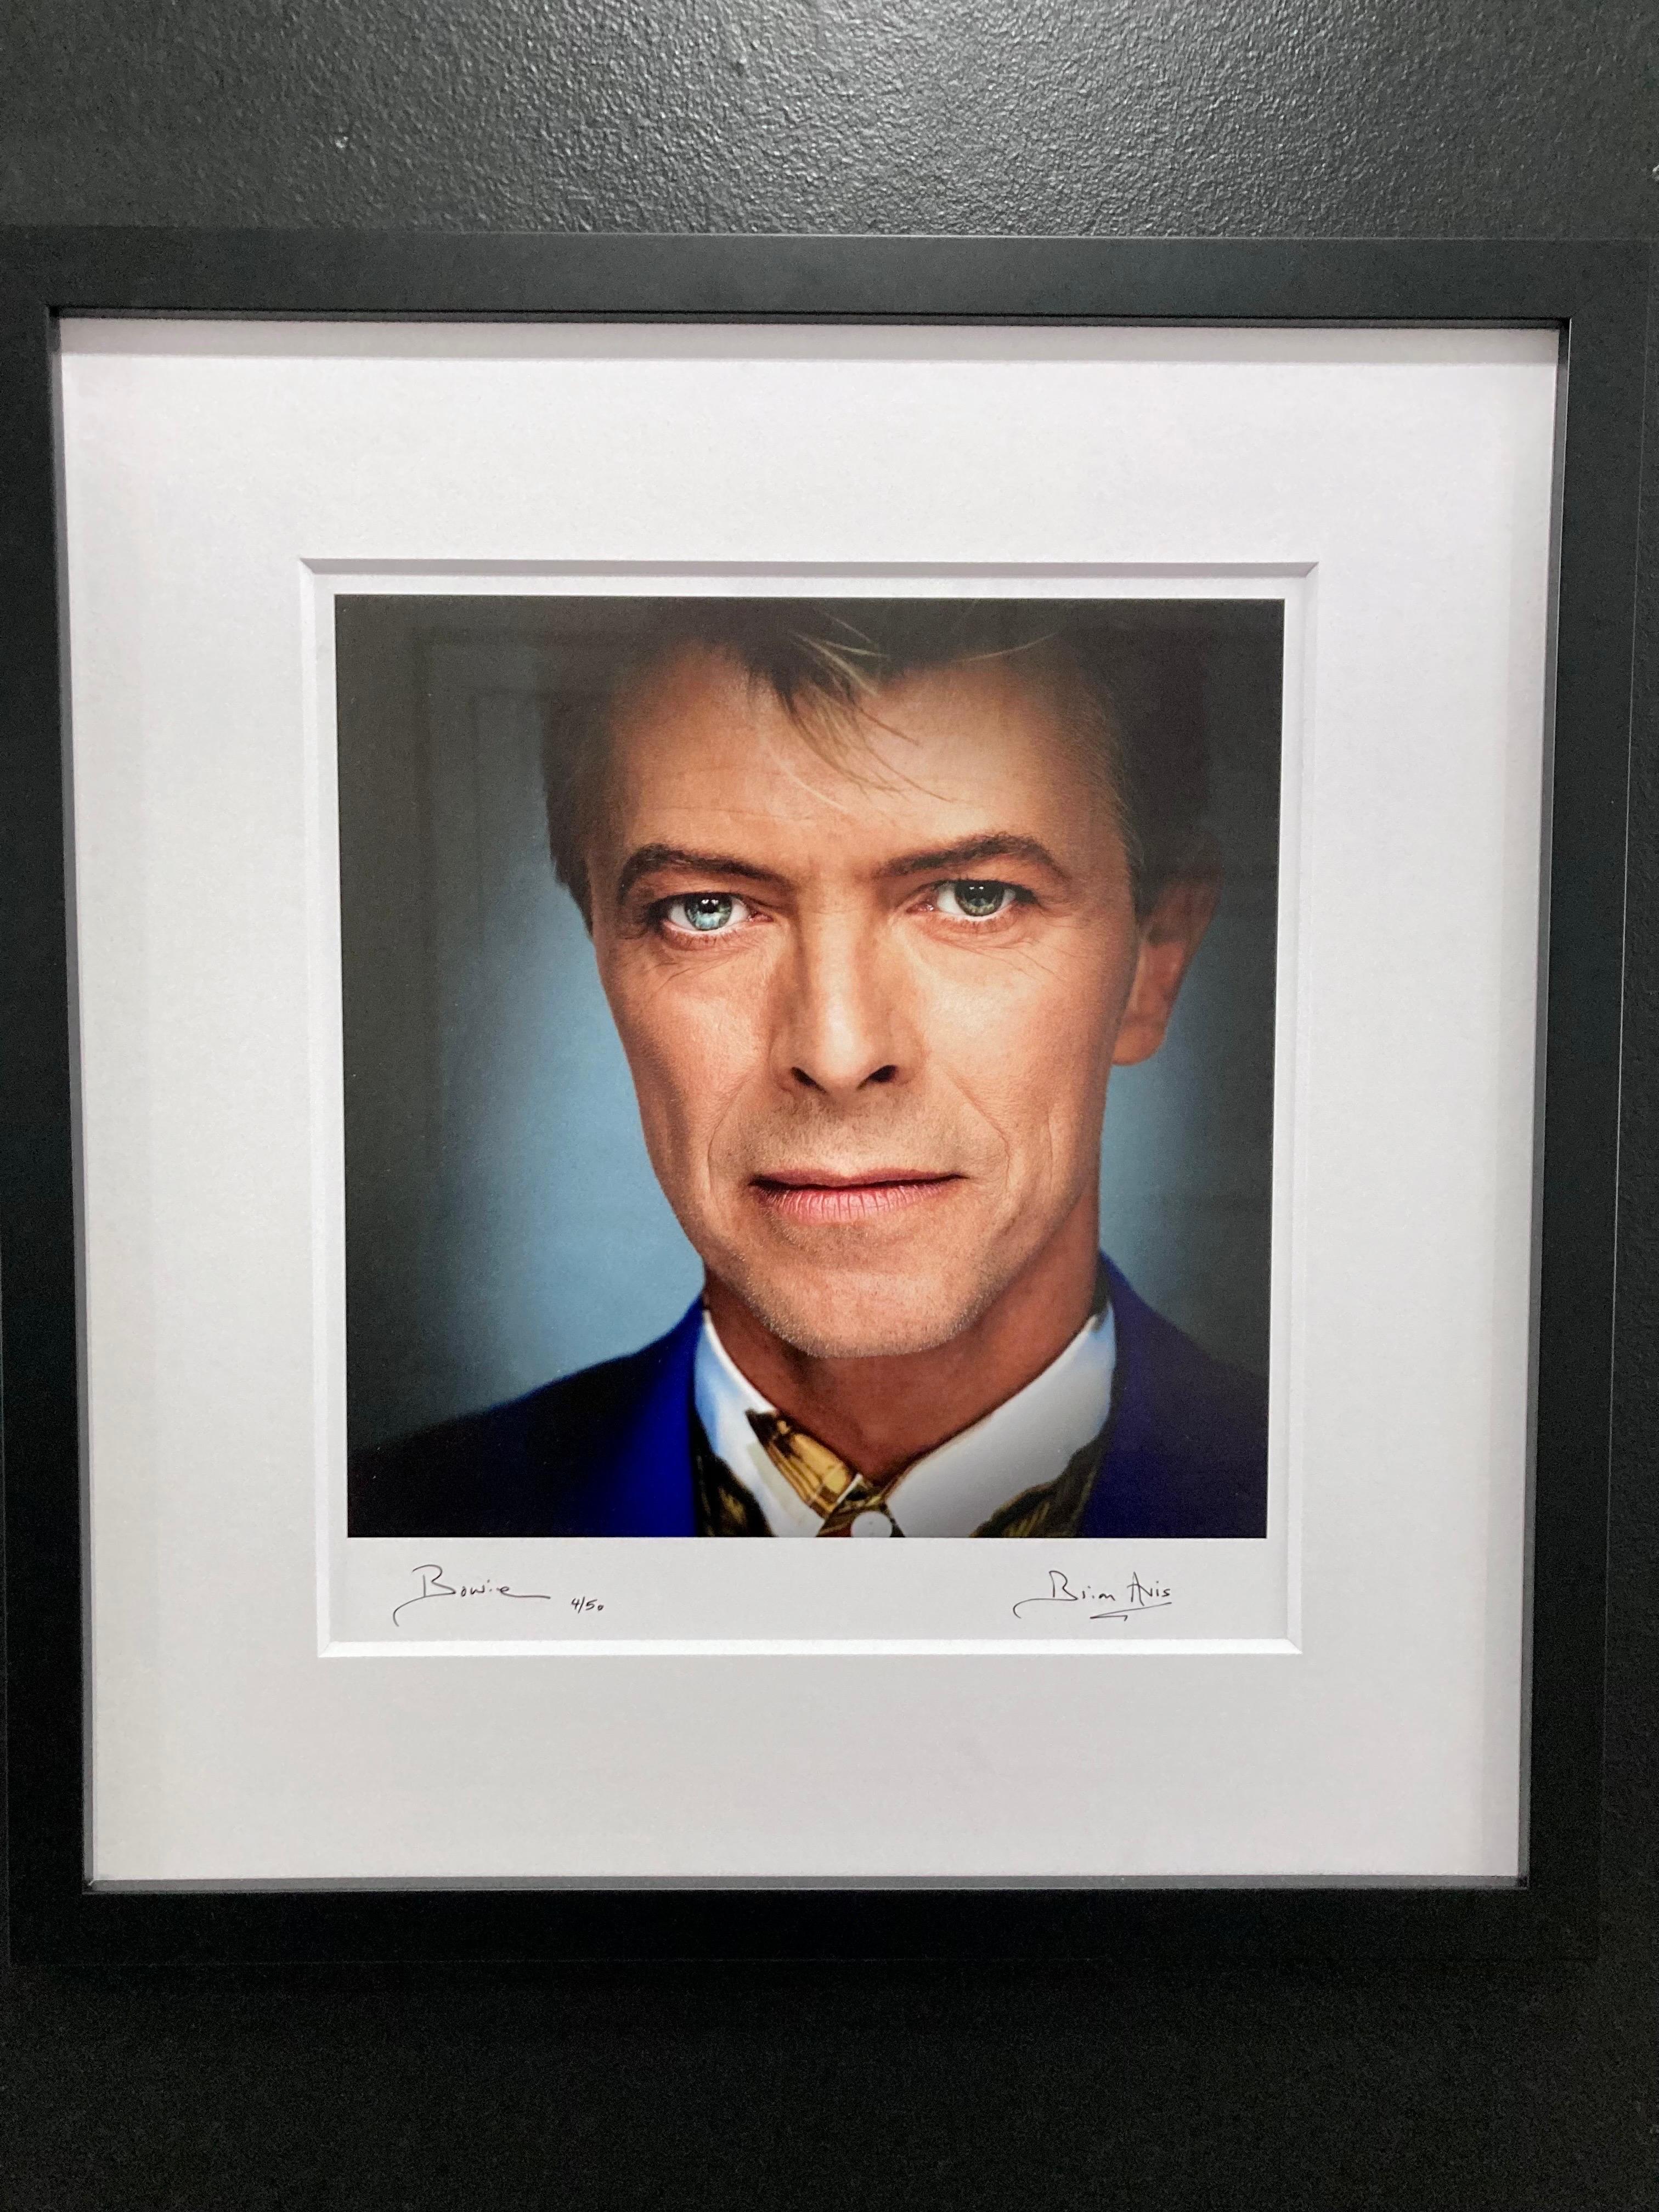 David Bowie portrait by Brian Aris, framed signed limited edition print For Sale 1